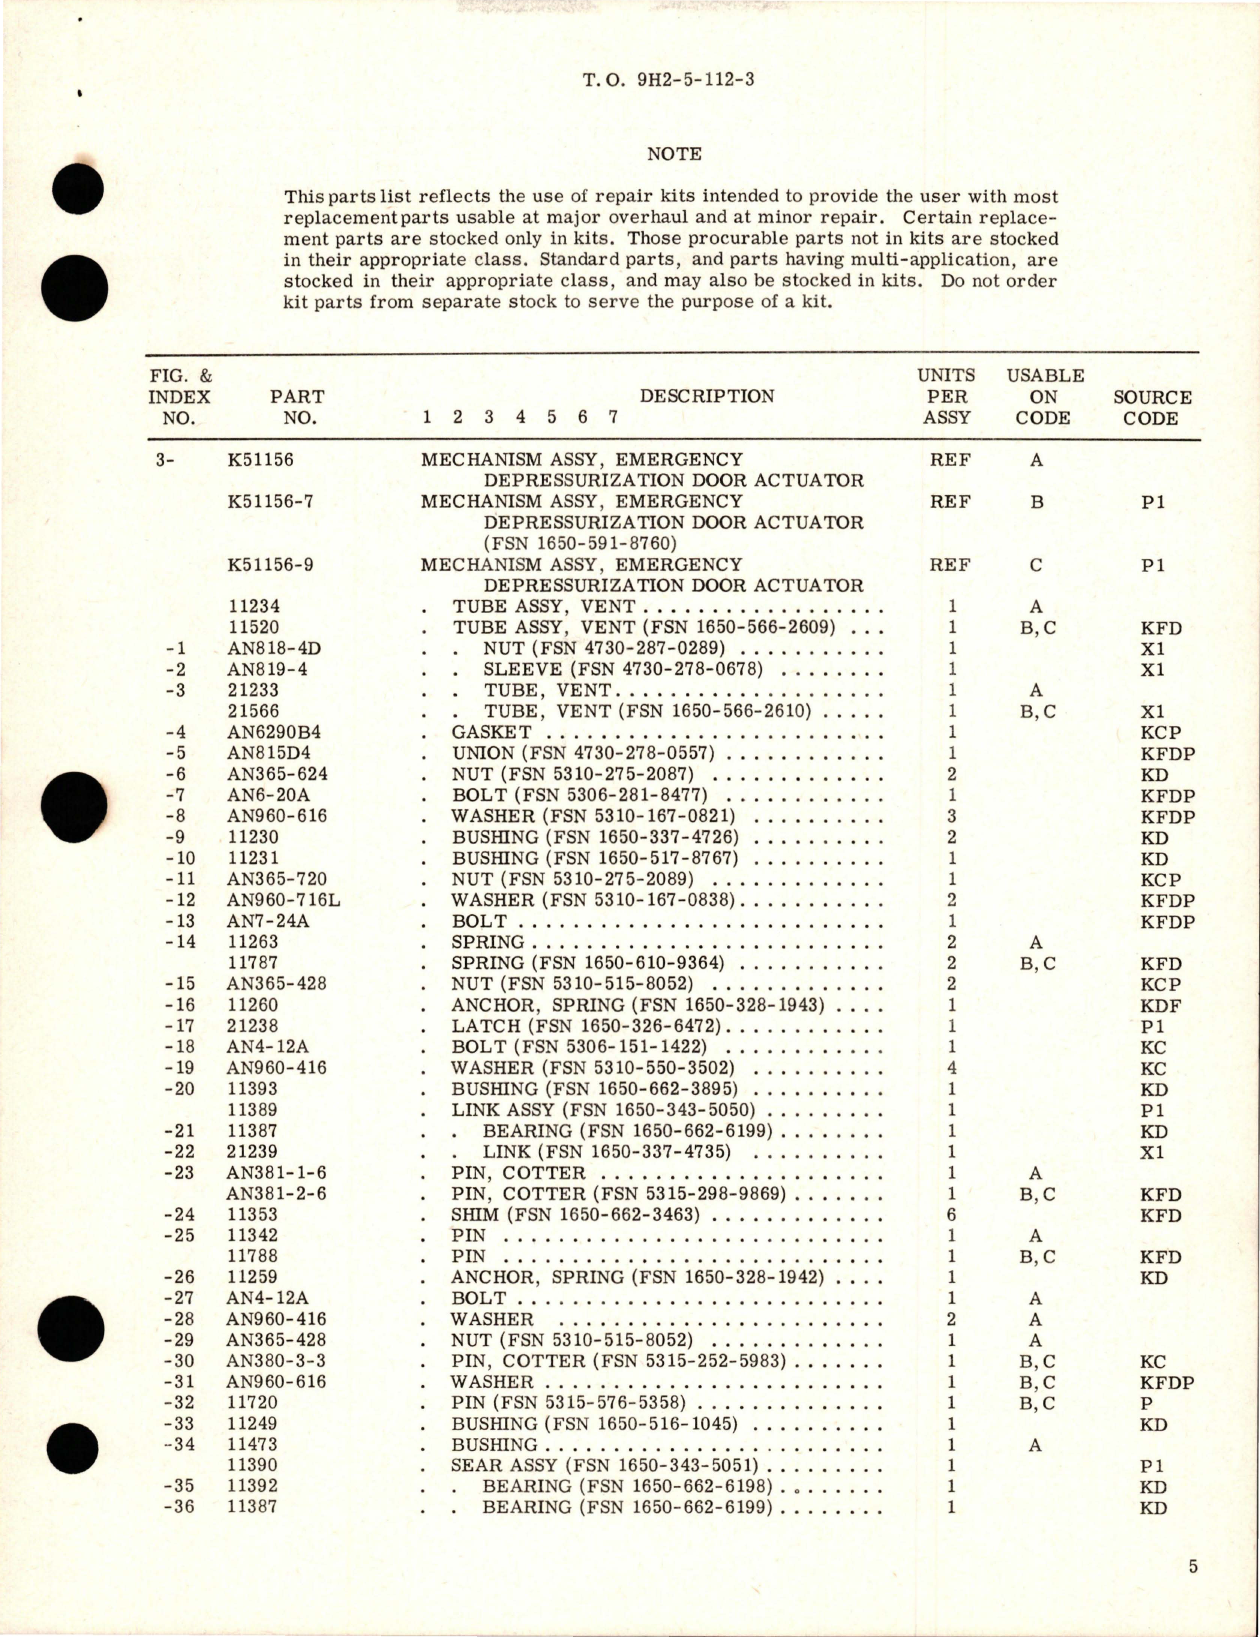 Sample page 5 from AirCorps Library document: Overhaul with Parts Breakdown for Emergency Depressurization Door Actuator Mechanism - Parts K51156, K51156-7, and K51156-9